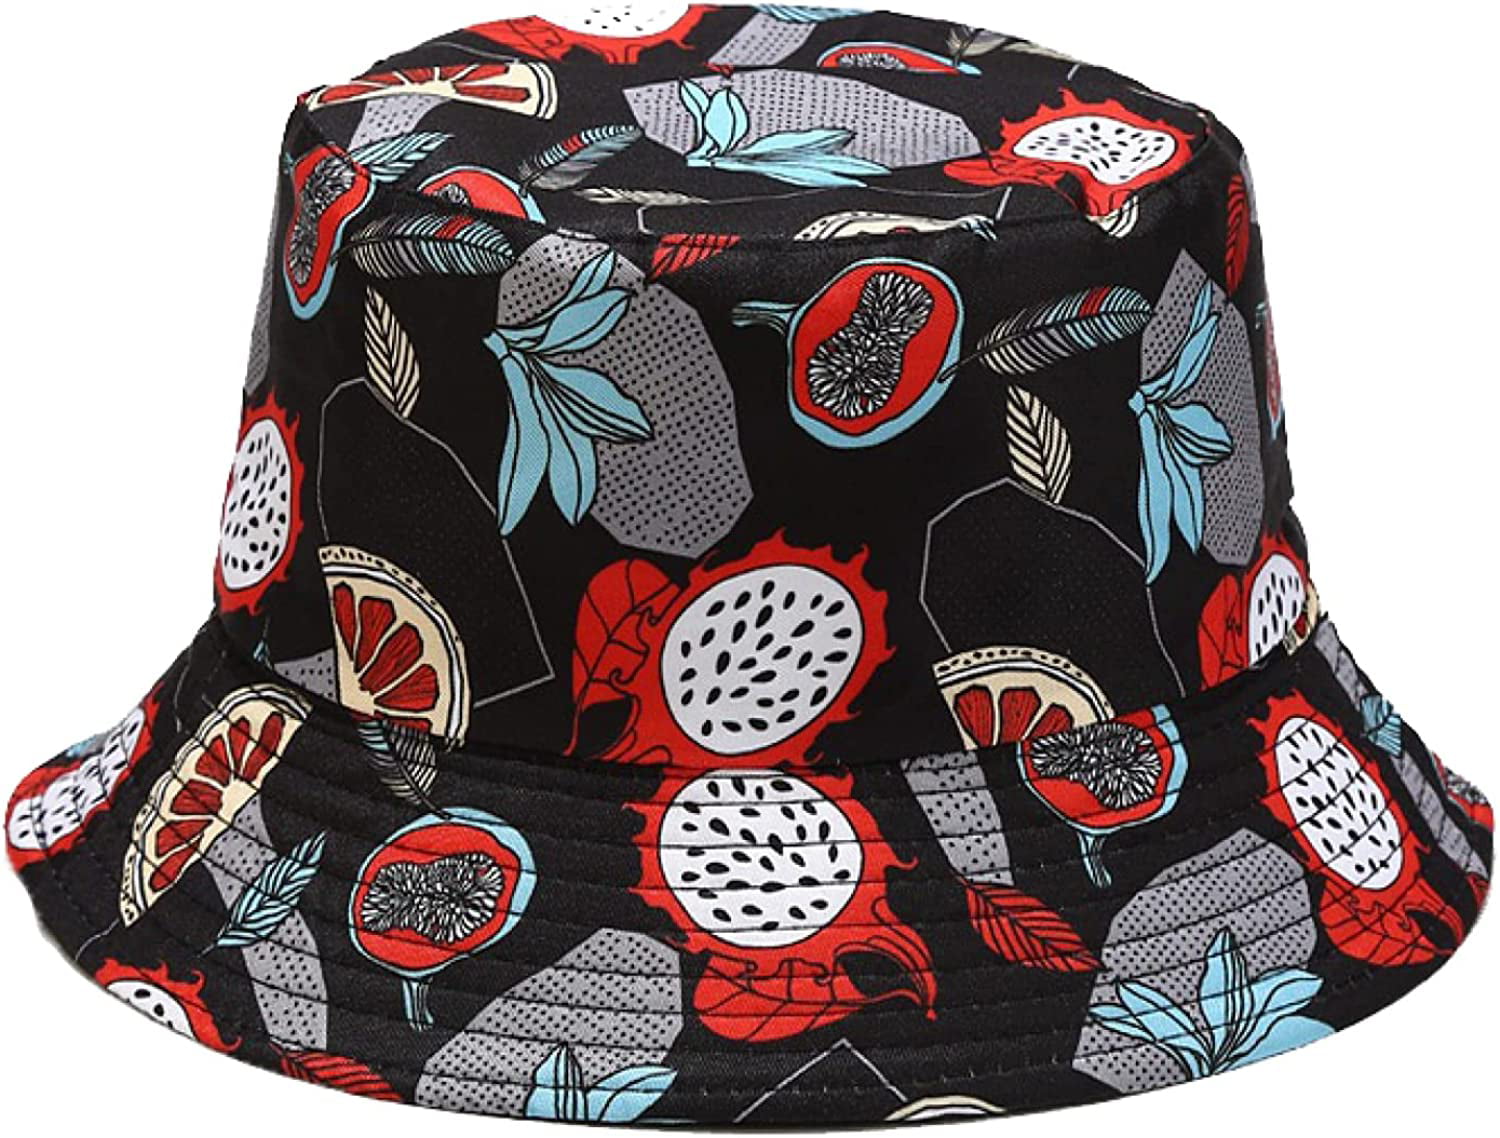 Hunting Gifts for Men, Fishing Fall Bucket Hat REVERSIBLE,FREE